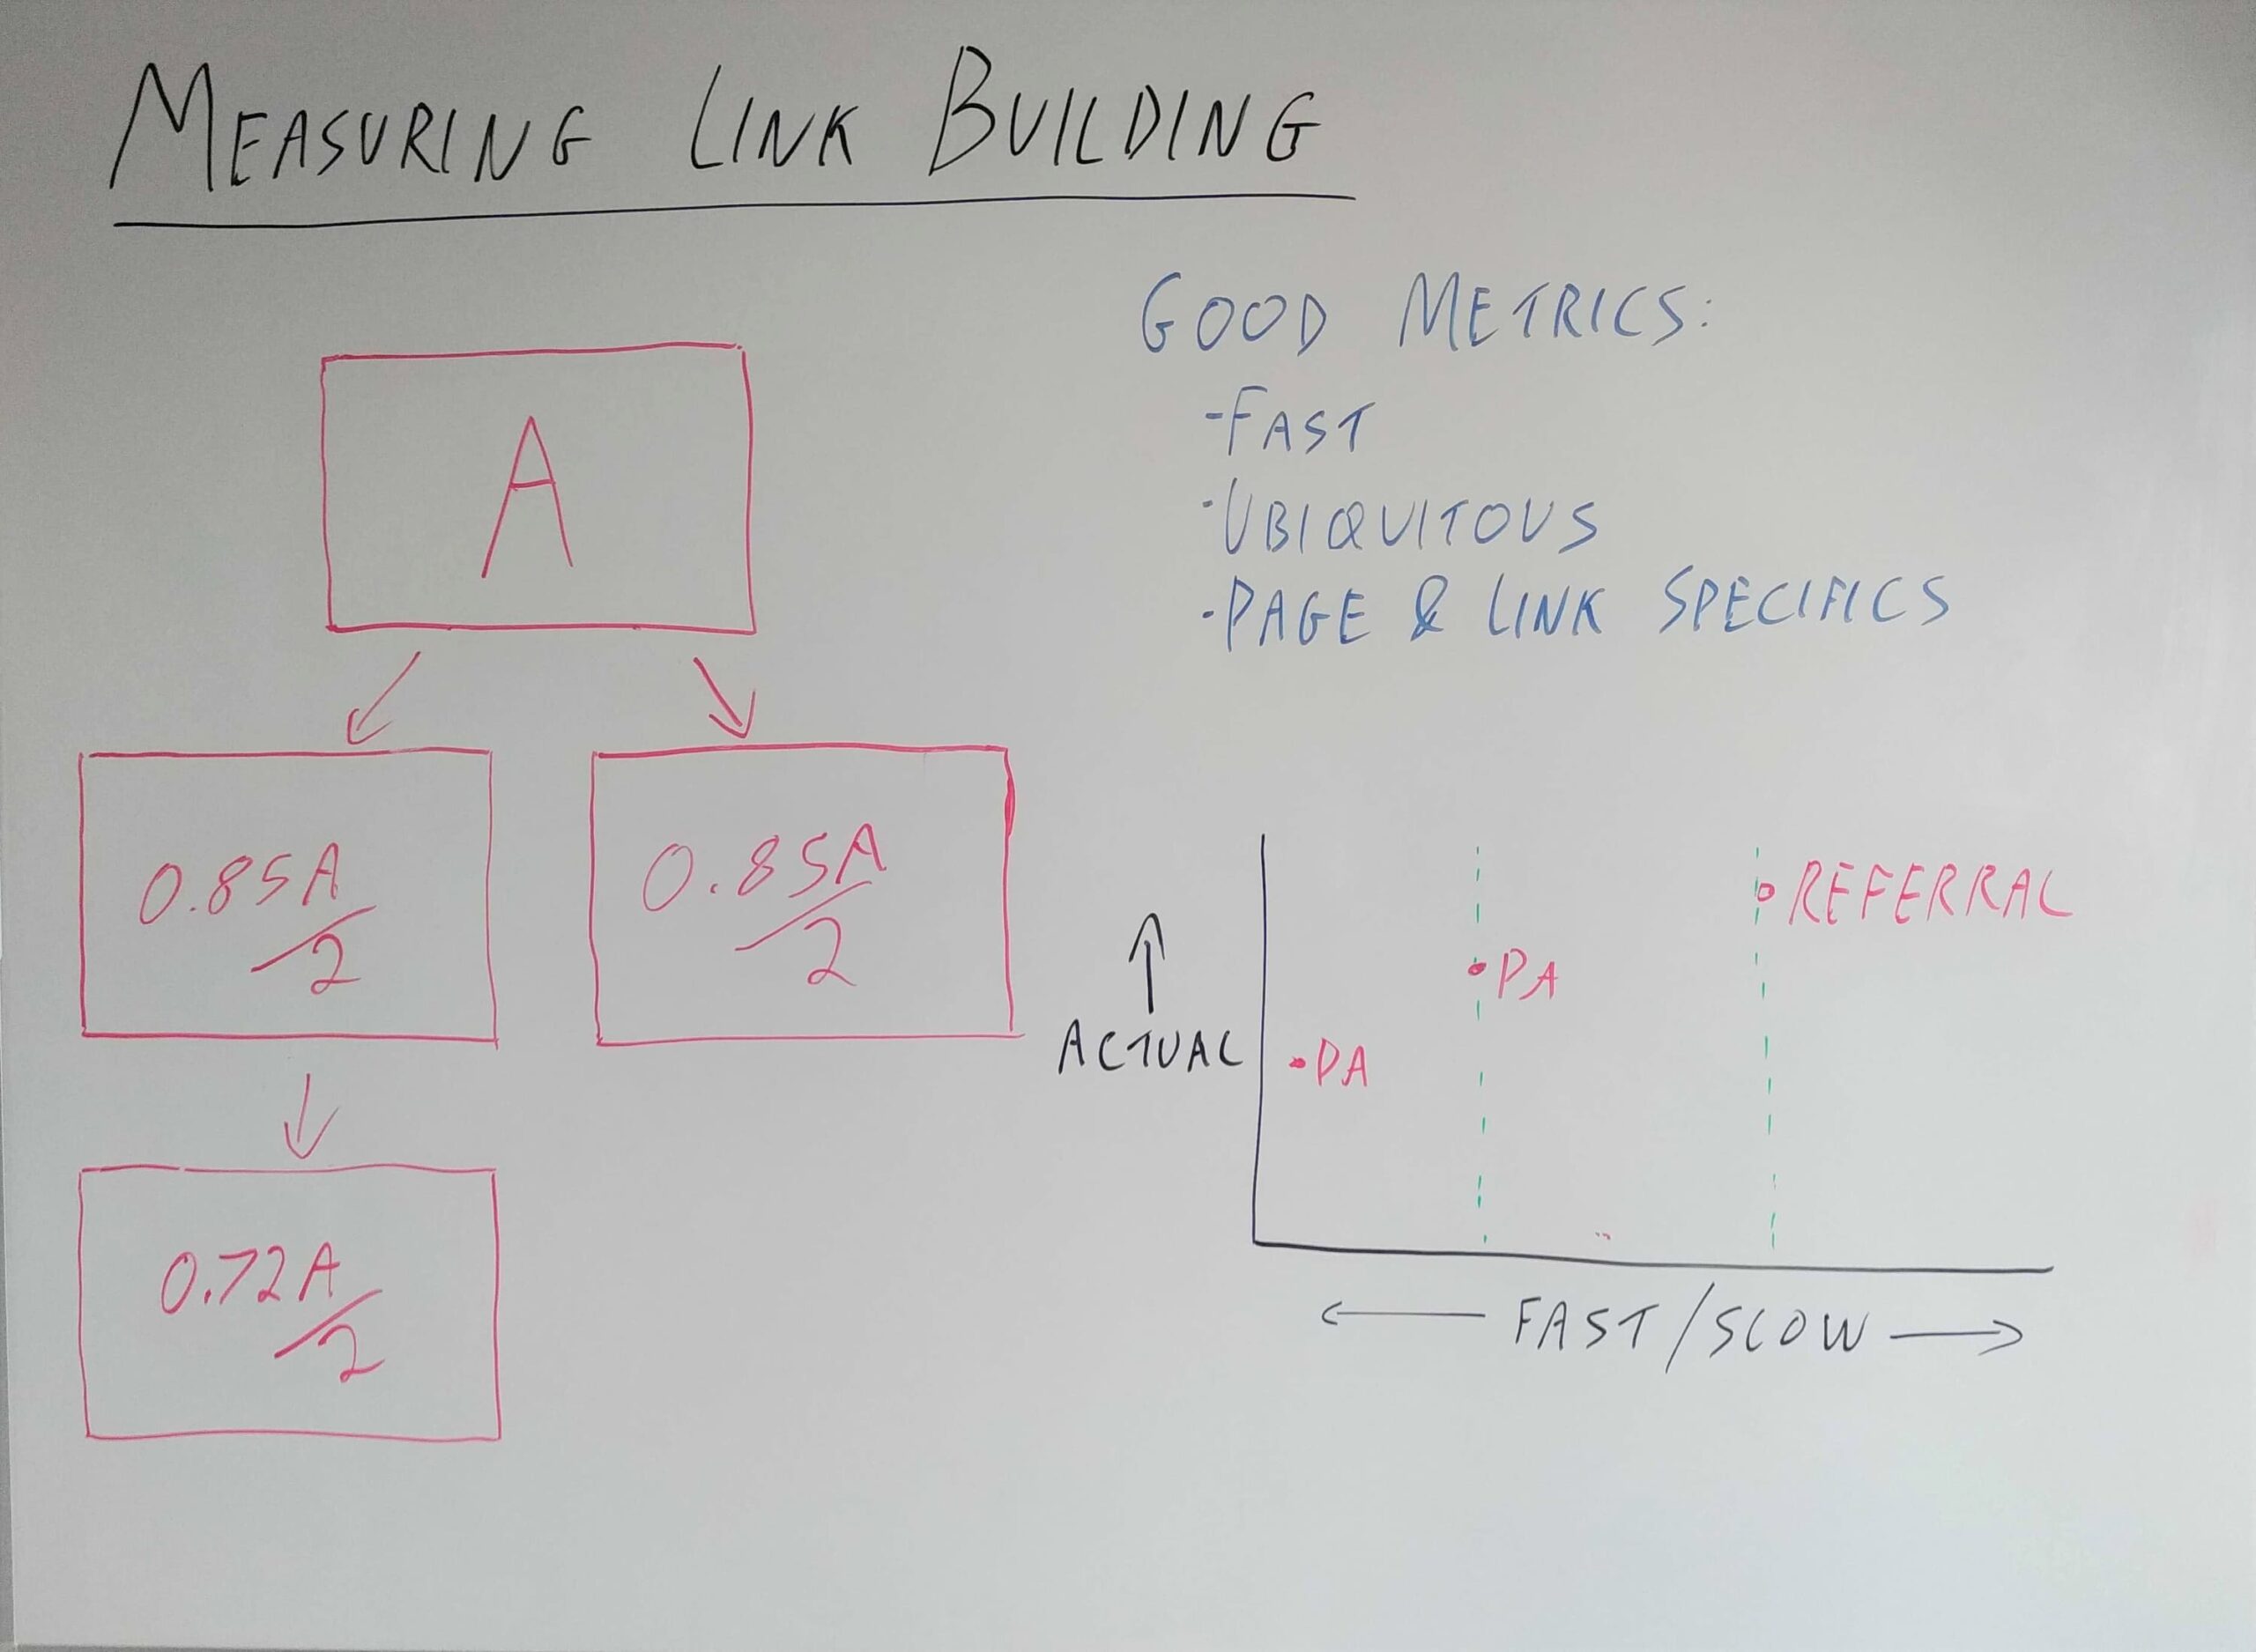 whiteboard outlining tips for the measurement of link building strategies